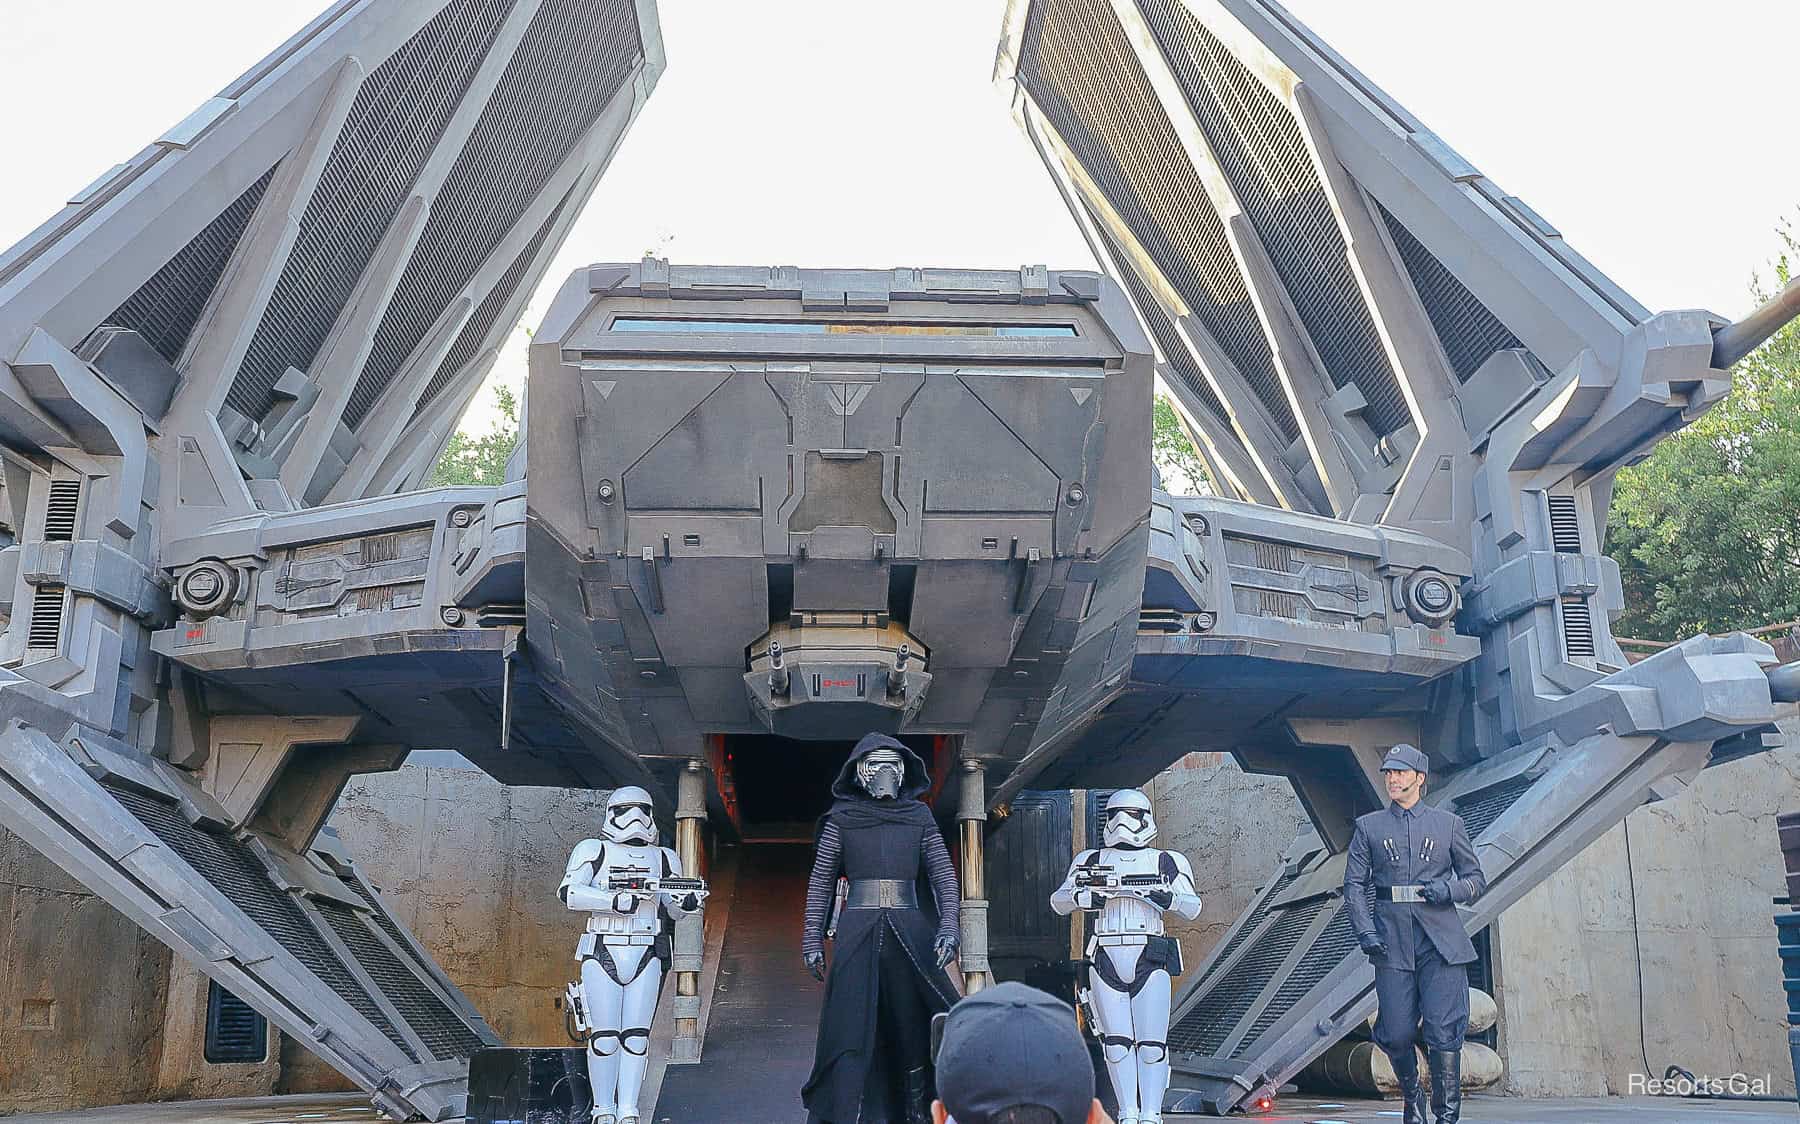 Kylo Ren disembarks his ship during the First Order Searches for the Resistance at Galaxy's Edge in Disney World. 